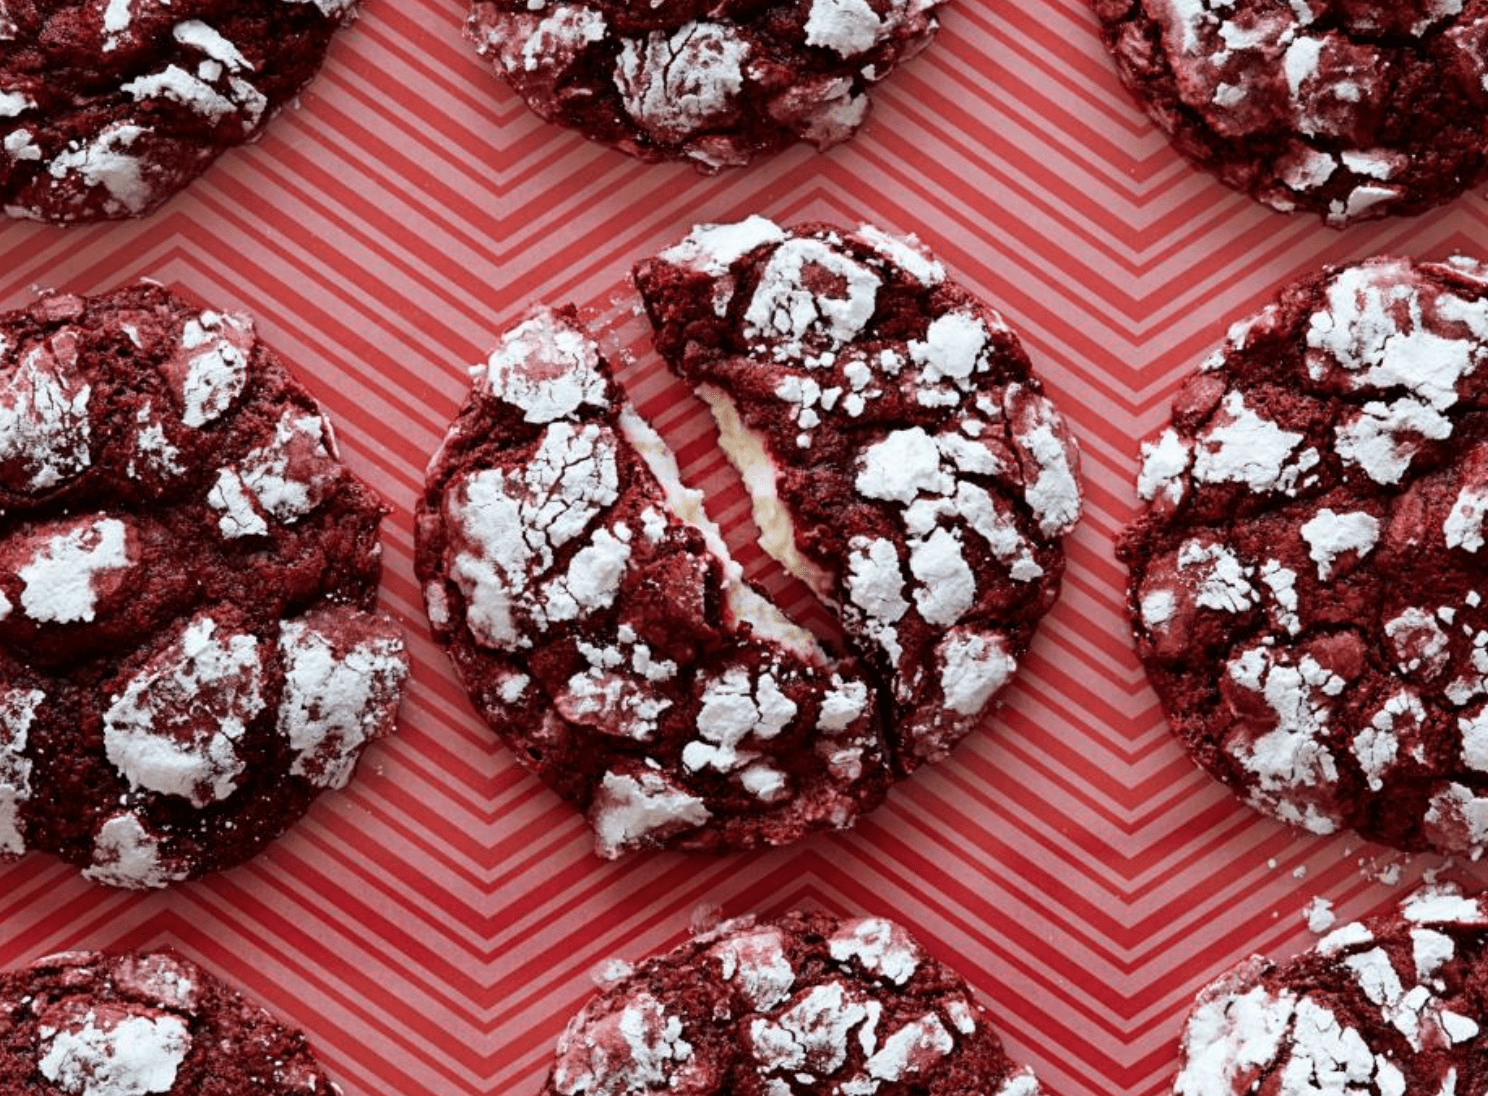 COOKIES AREN'T JUST FOR CHRISTMAS AT KUSH21